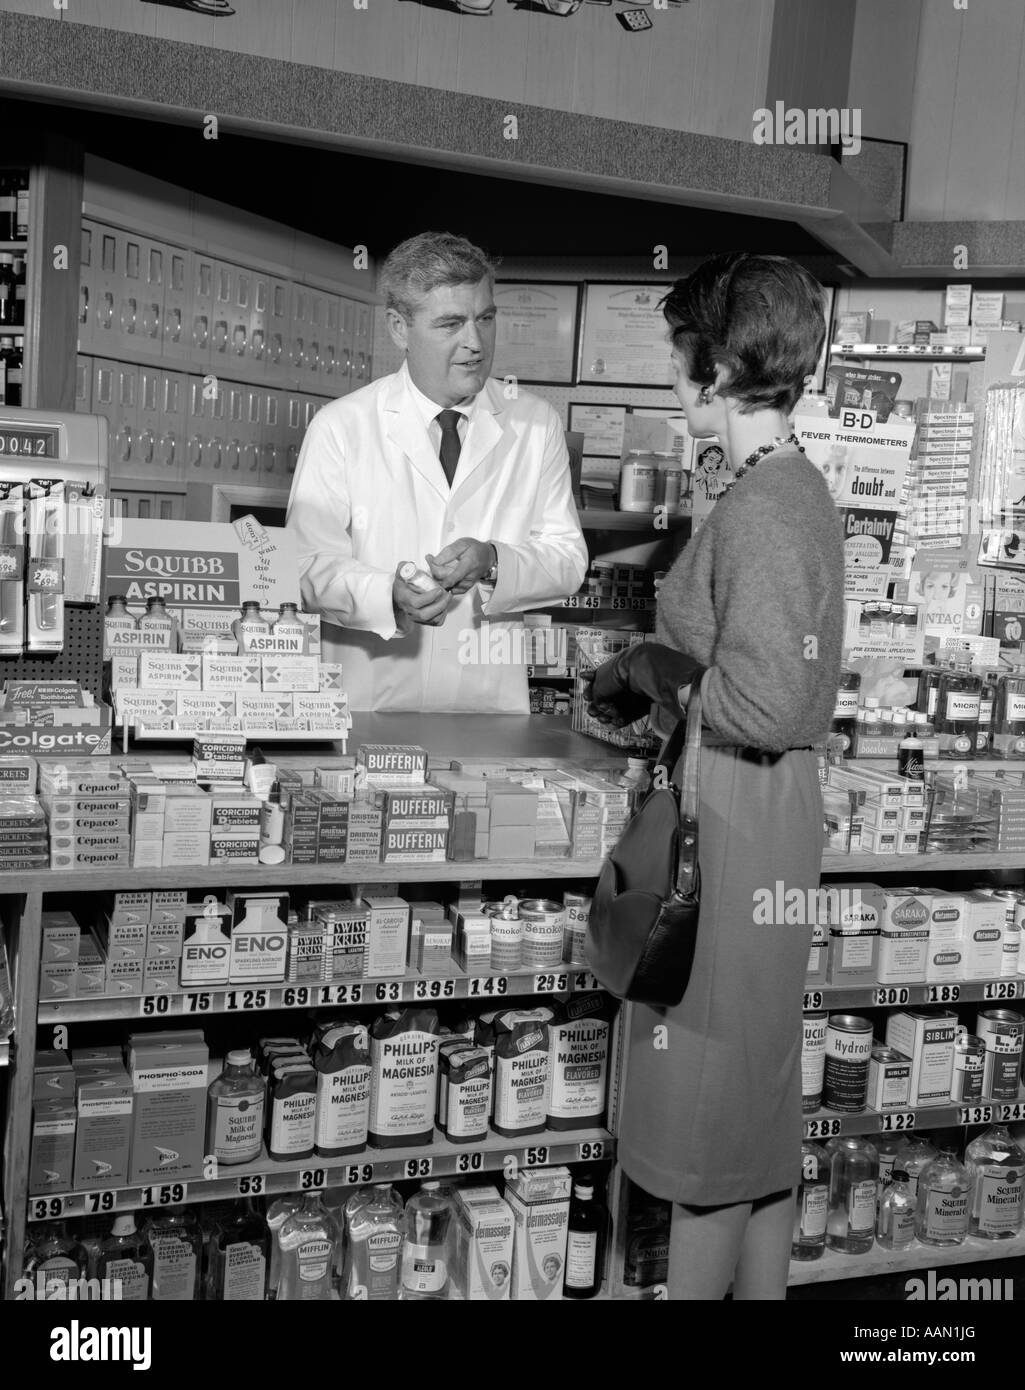 1960s WOMAN COUNTER PHARMACY TALK TALKING PHARMACIST BUYING DRUGS PRODUCT CUSTOMER SALES SERVICE RETRO DRUG STORE Stock Photo